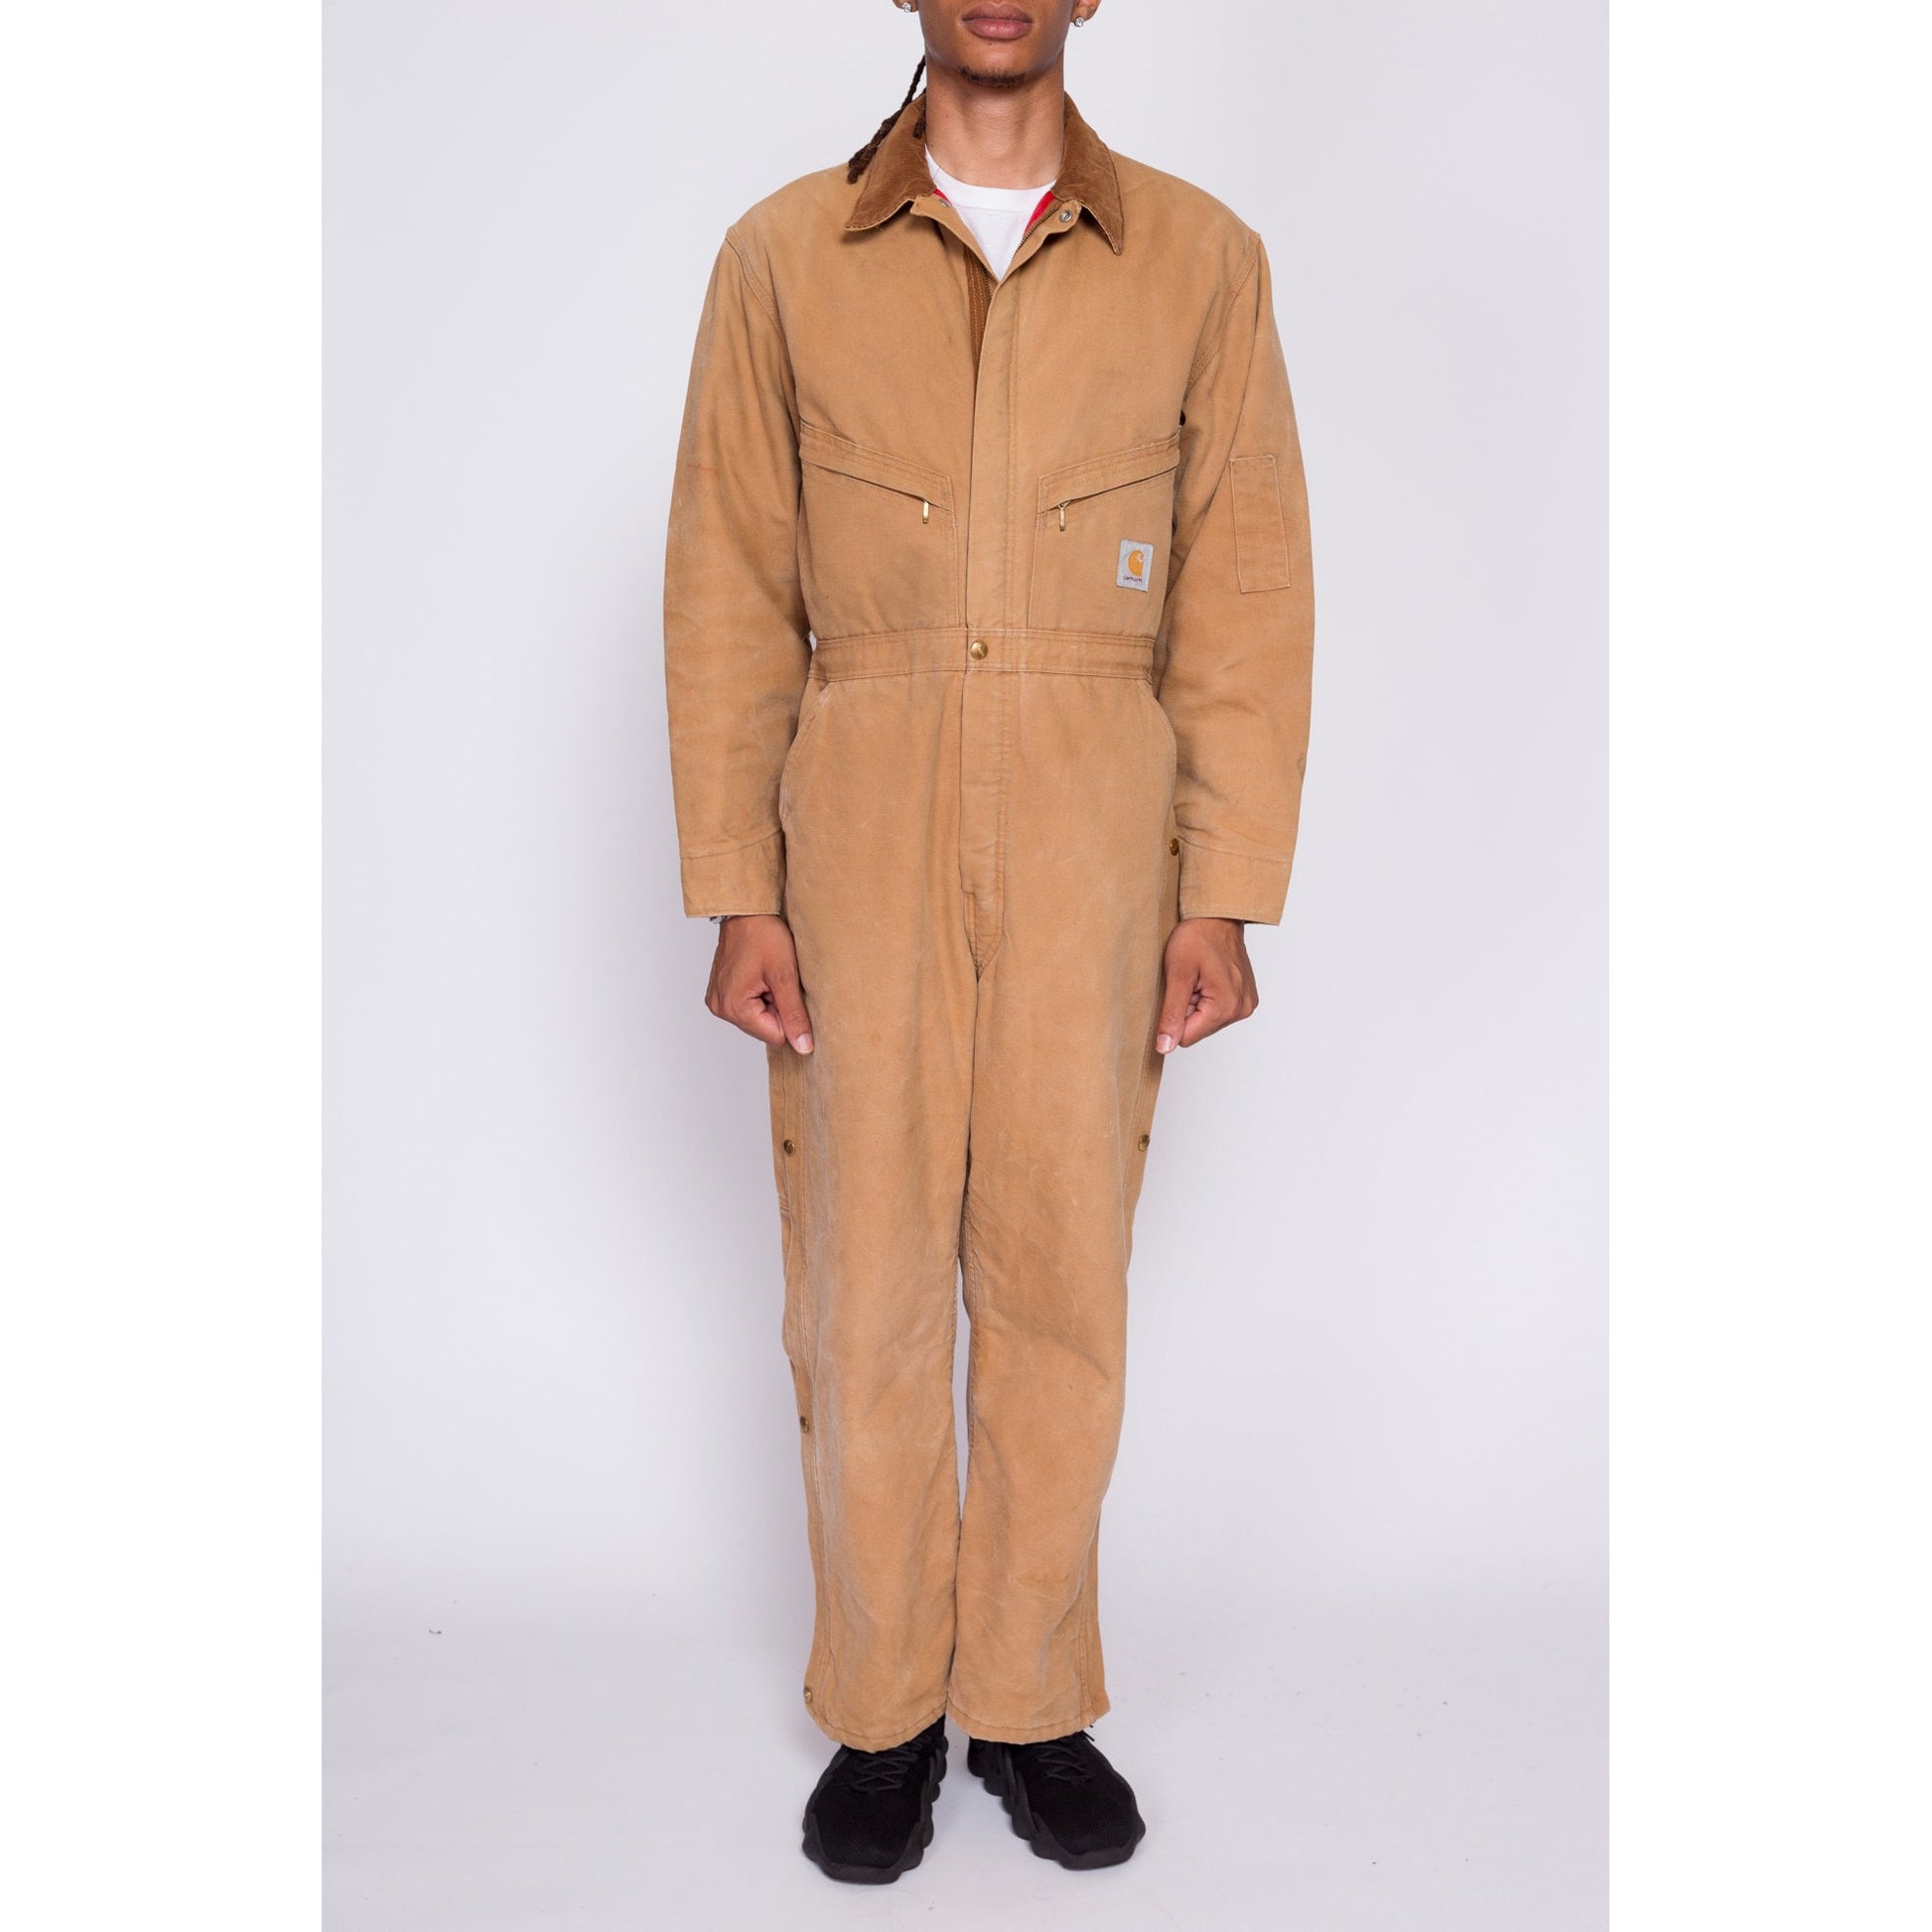 90s Carhartt Made In USA Insulated Coveralls - 42 Short | Vintage Tan Cotton Duck Canvas Workwear Zip Front Jumpsuit